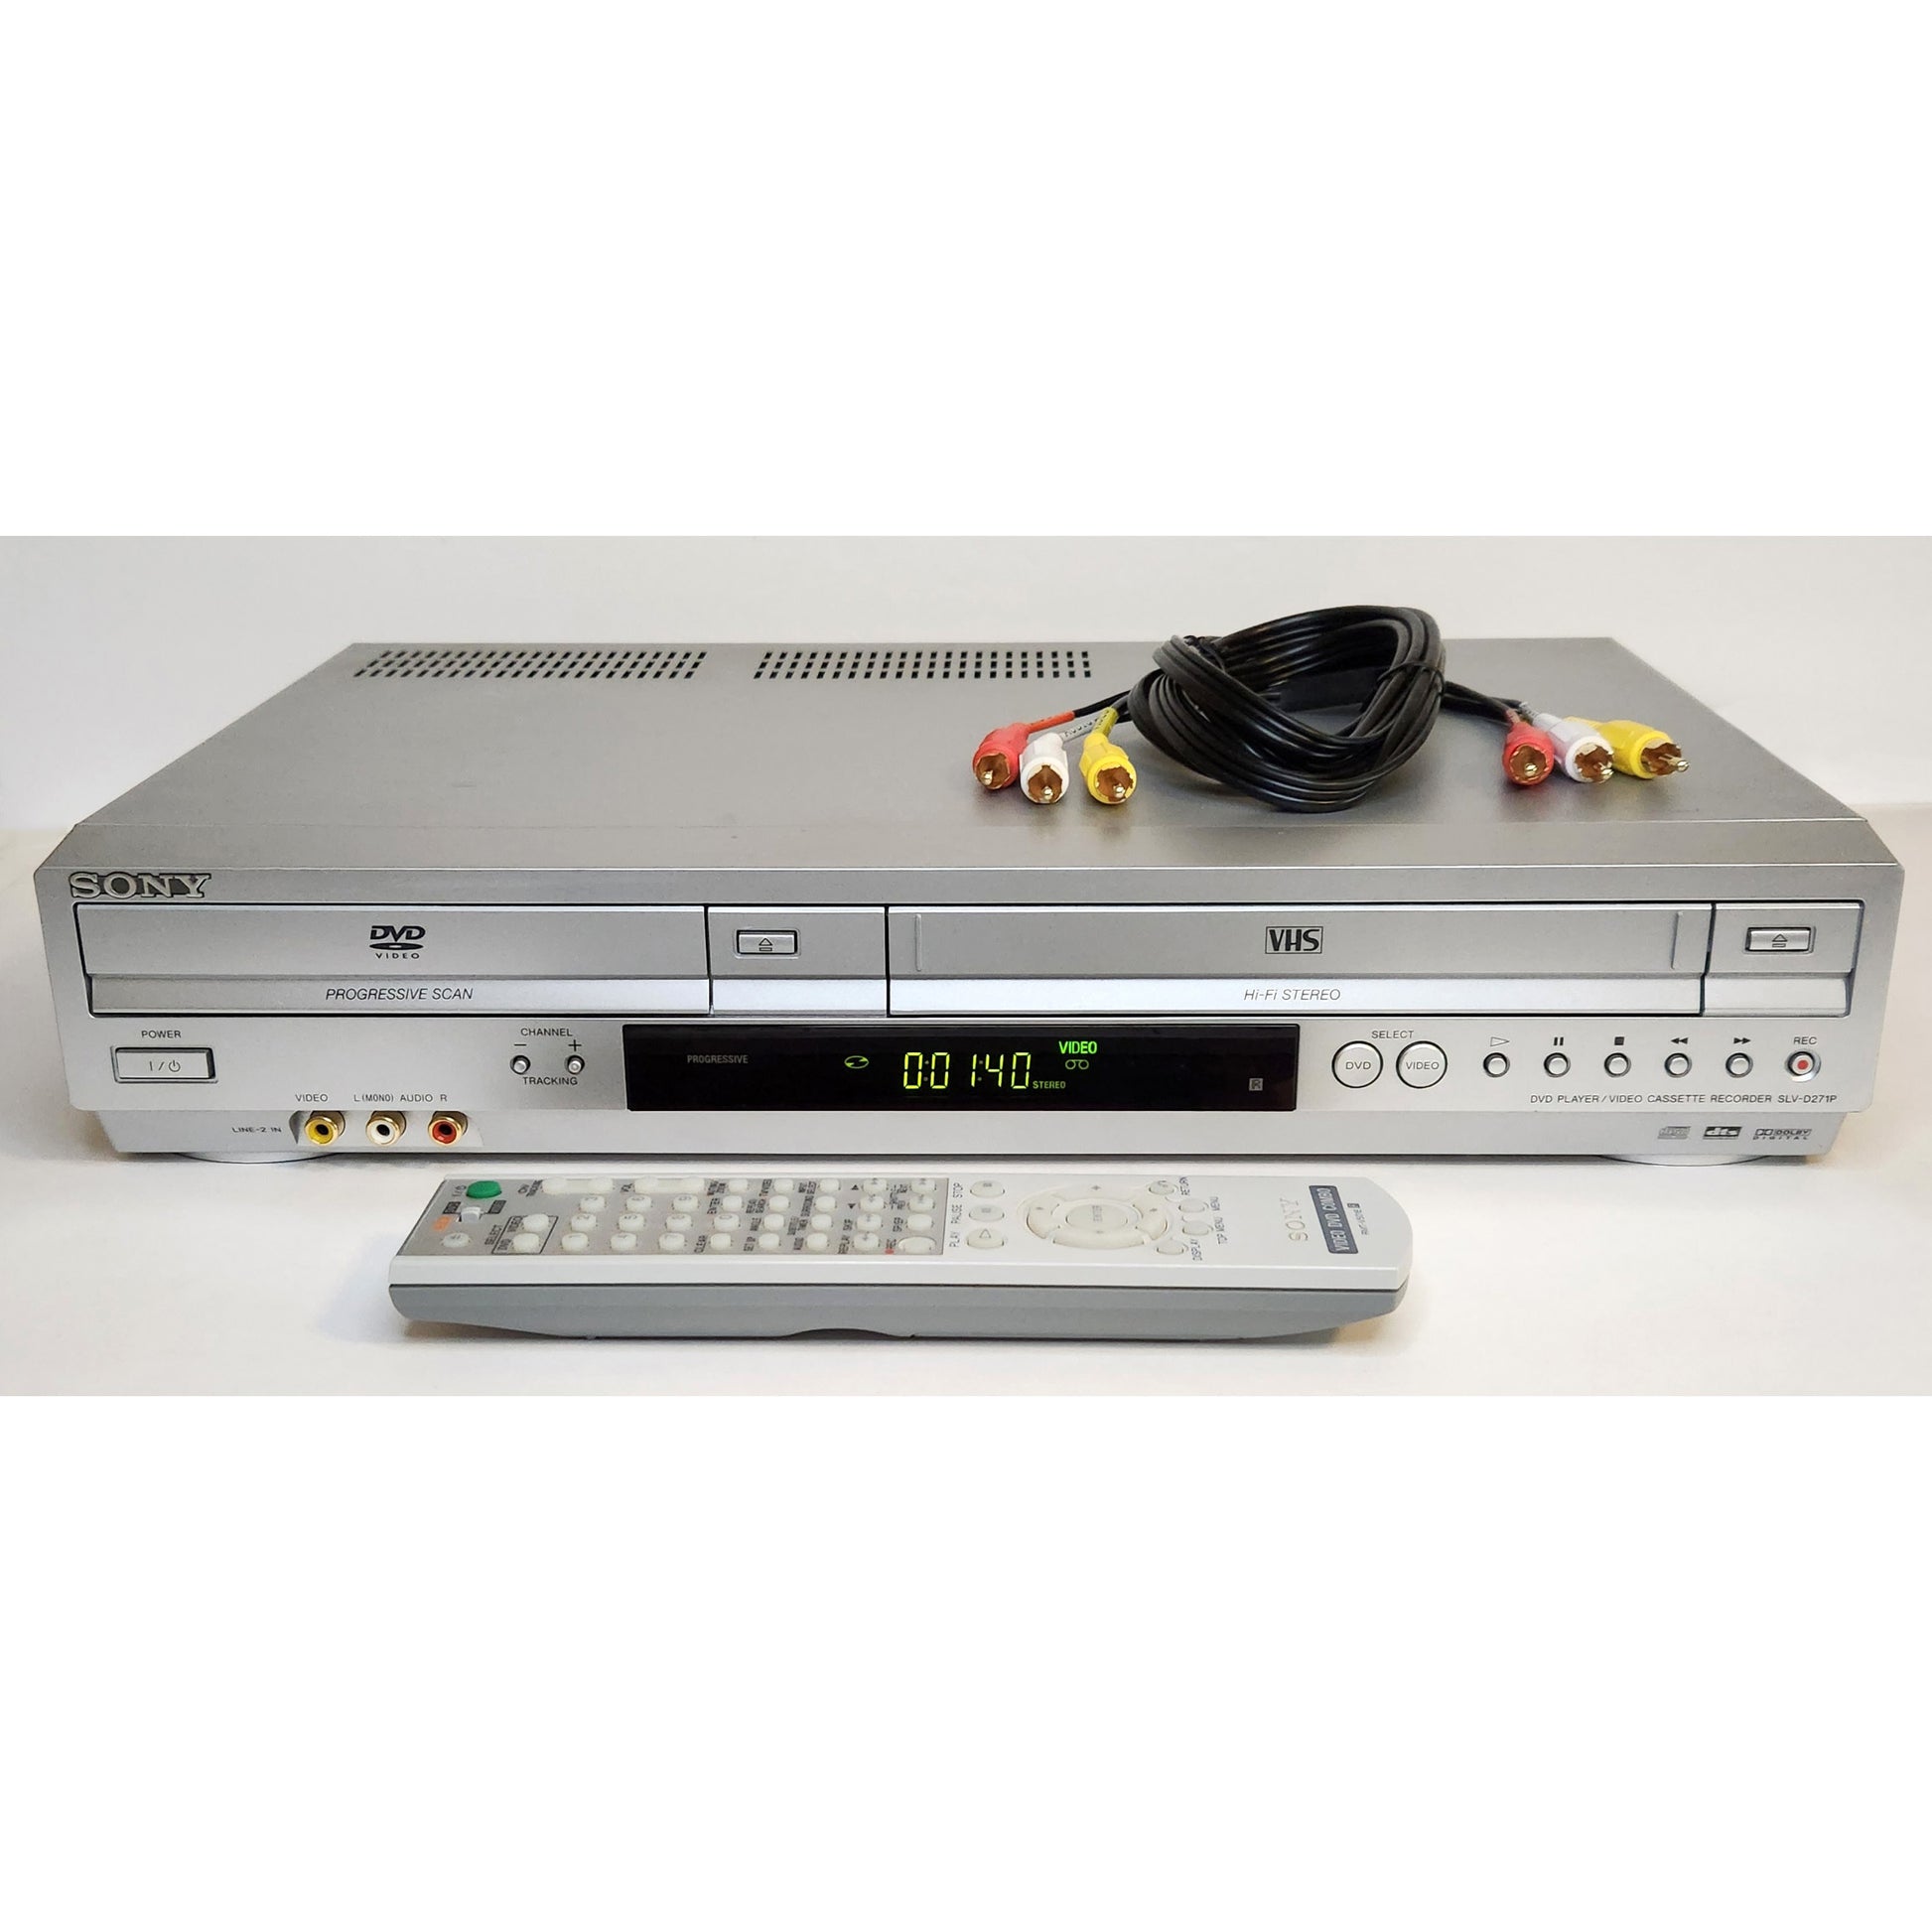 Sony SLV-D271P VCR/DVD Player Combo